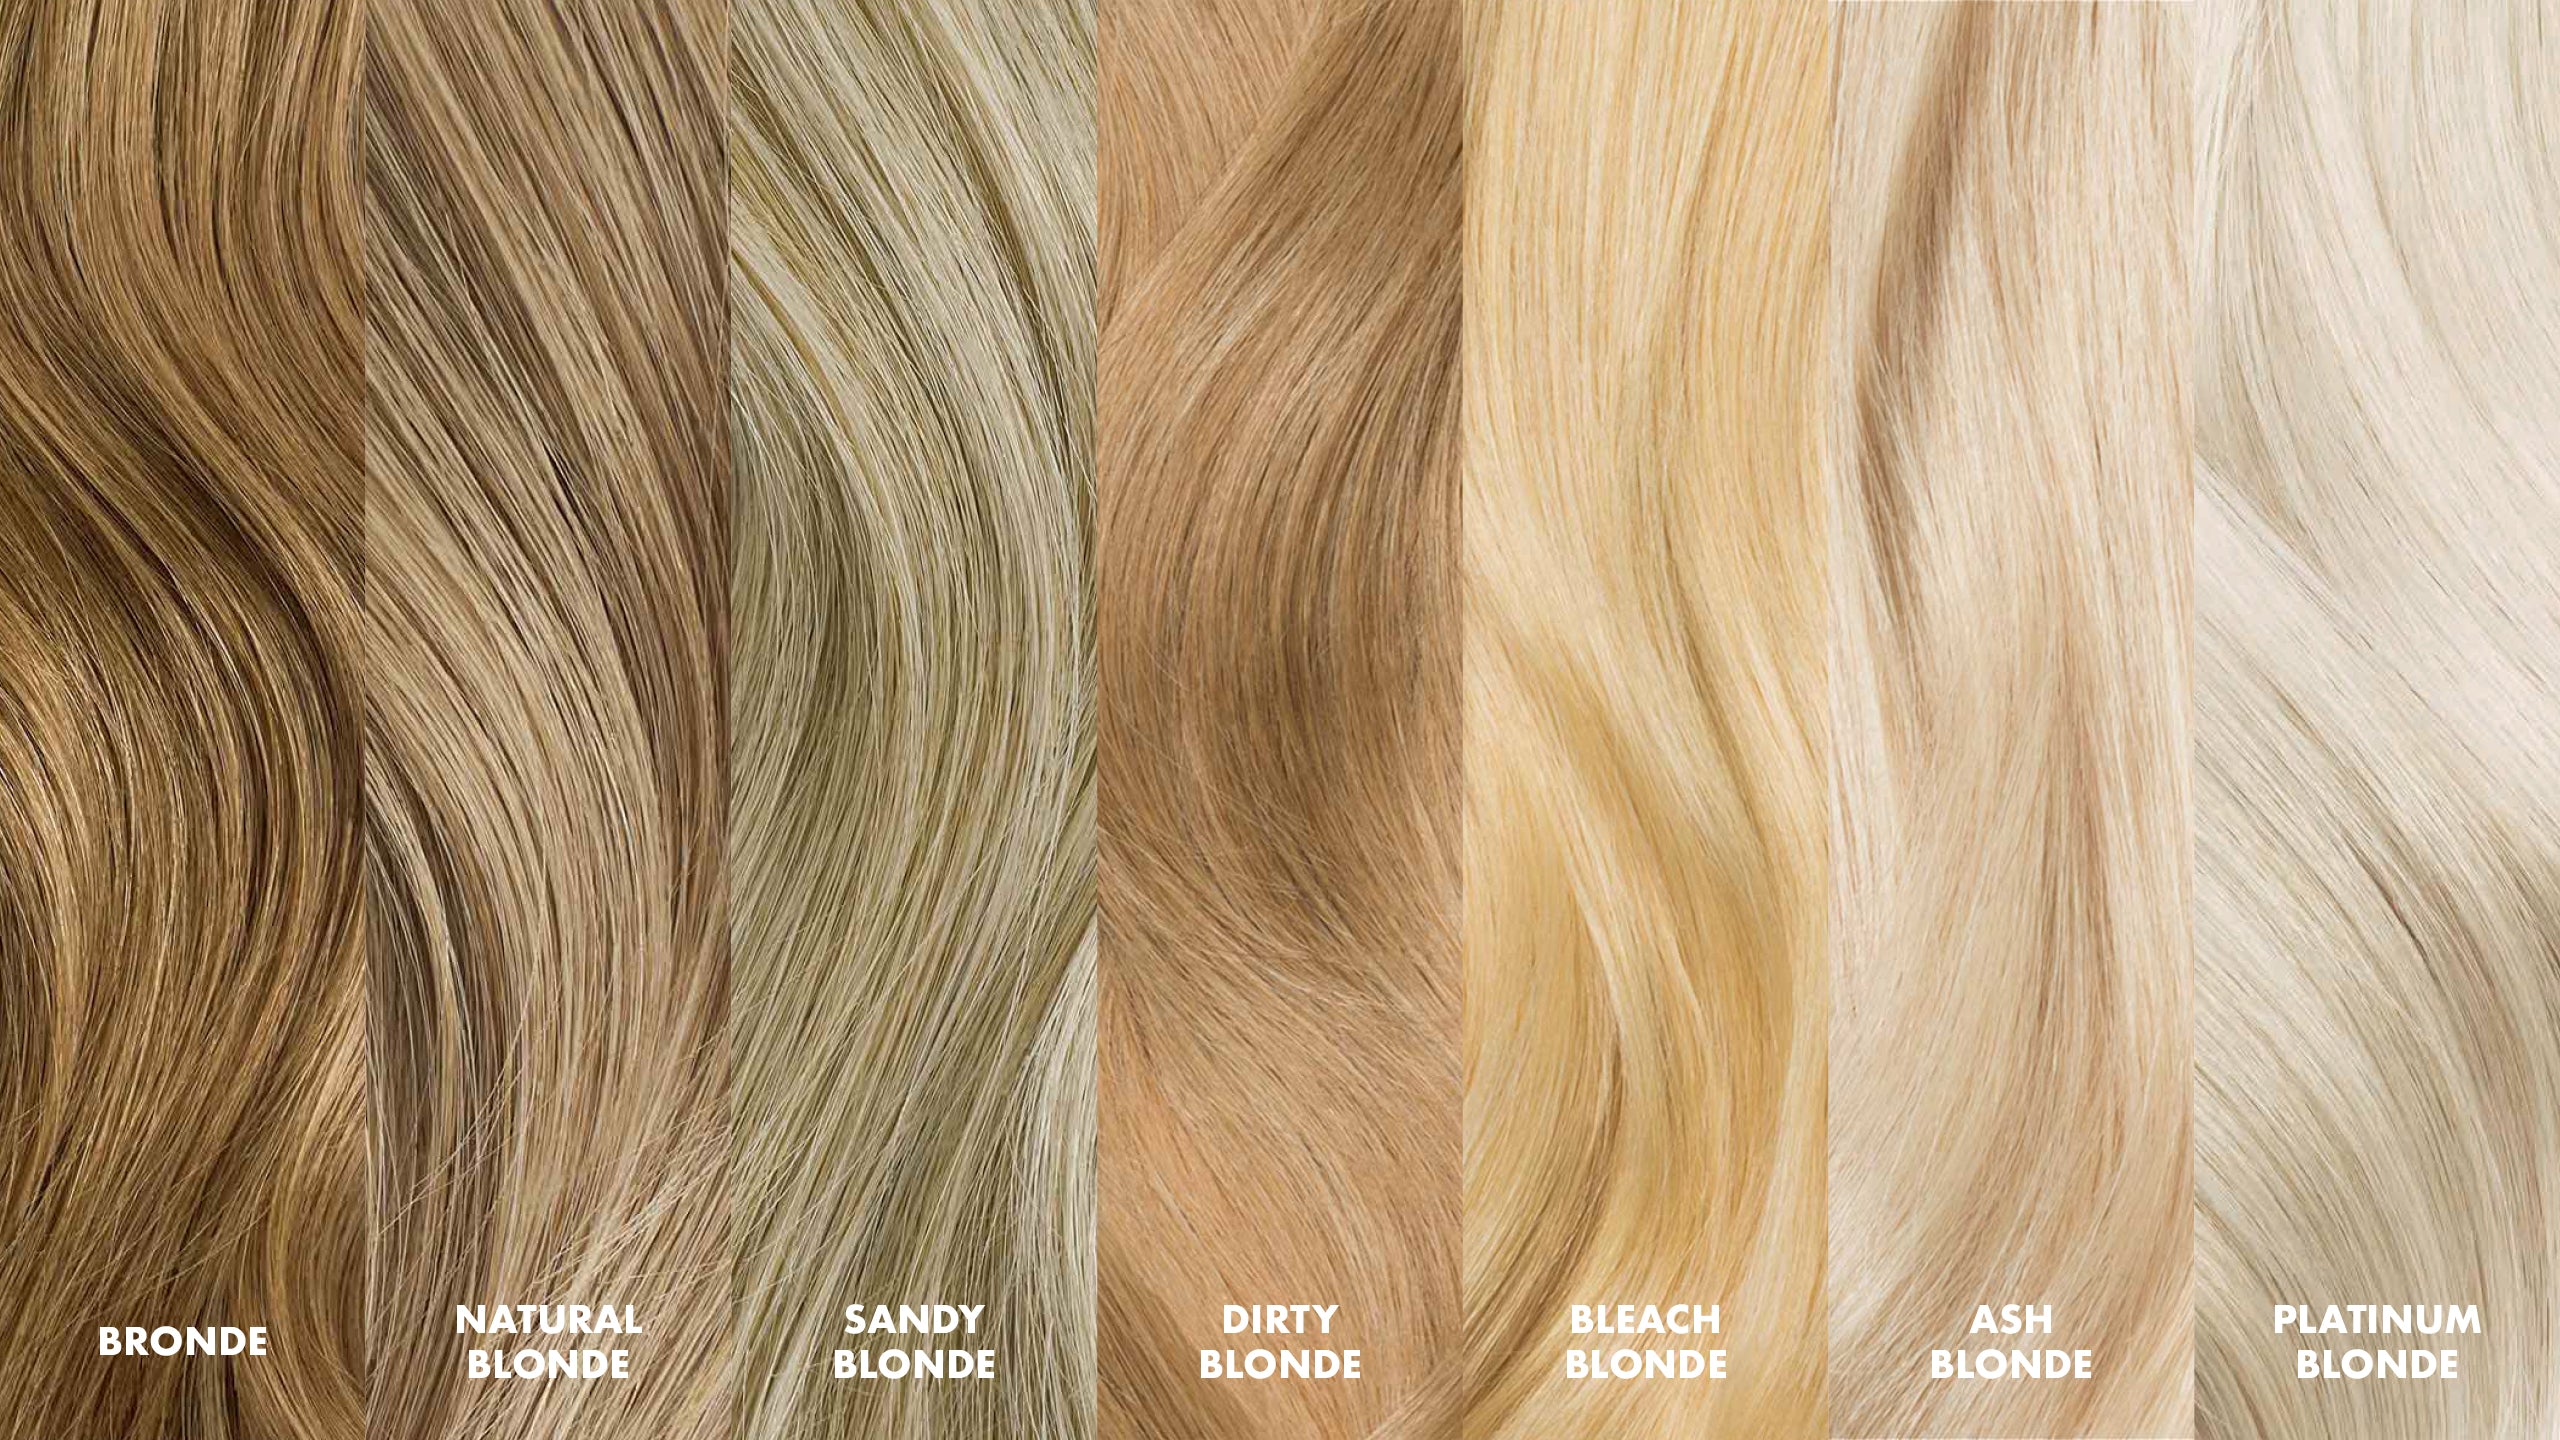 10. "The Best Hairstyles for Sandy Bleach Blonde Hair" - wide 1